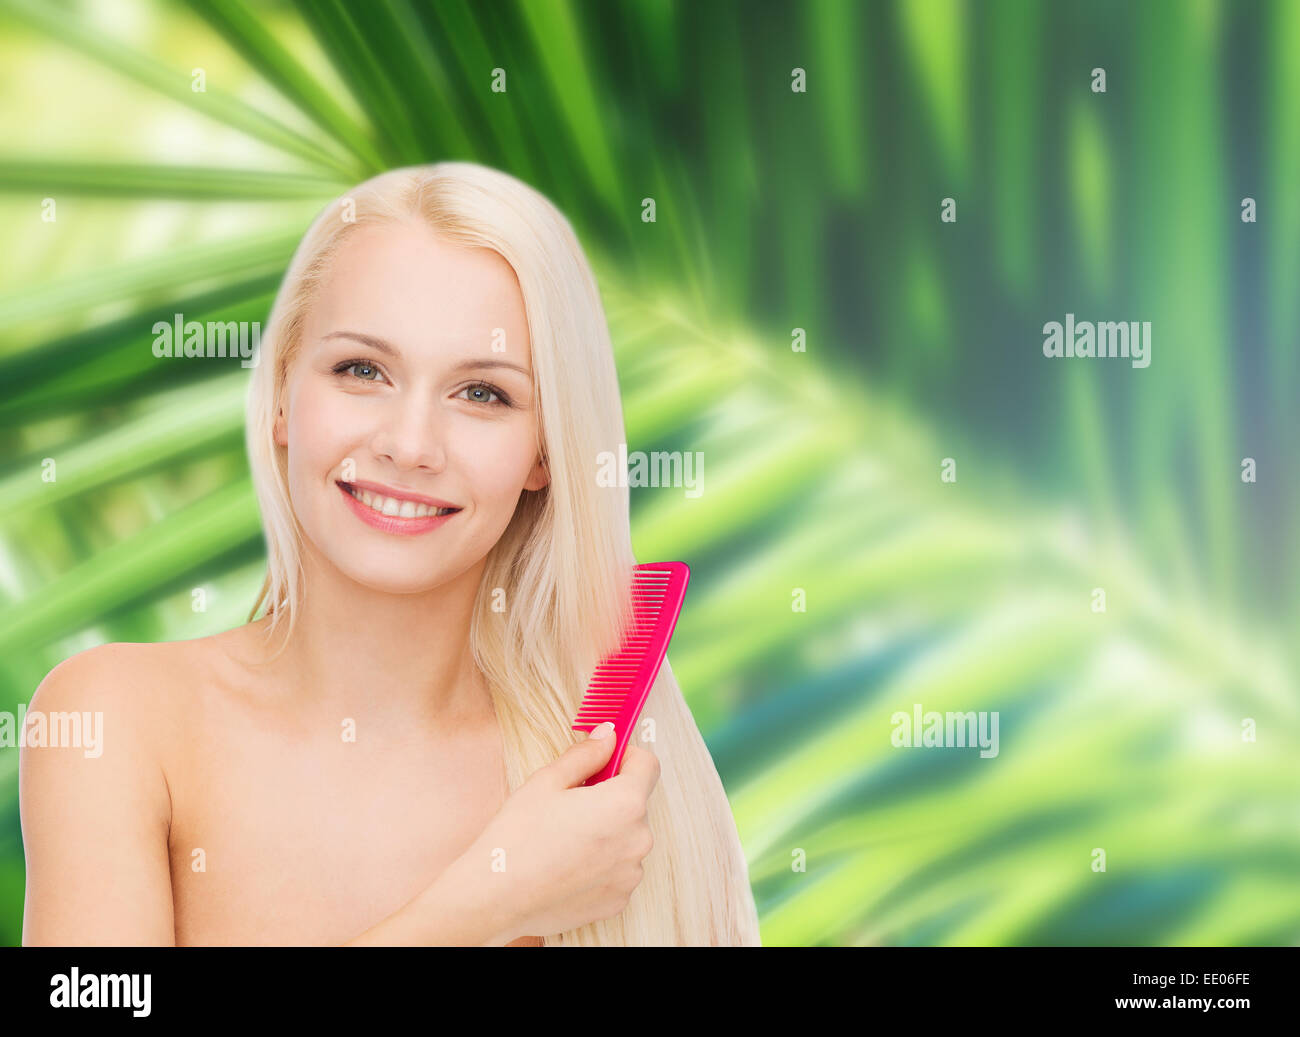 smiling woman with hair brush Stock Photo